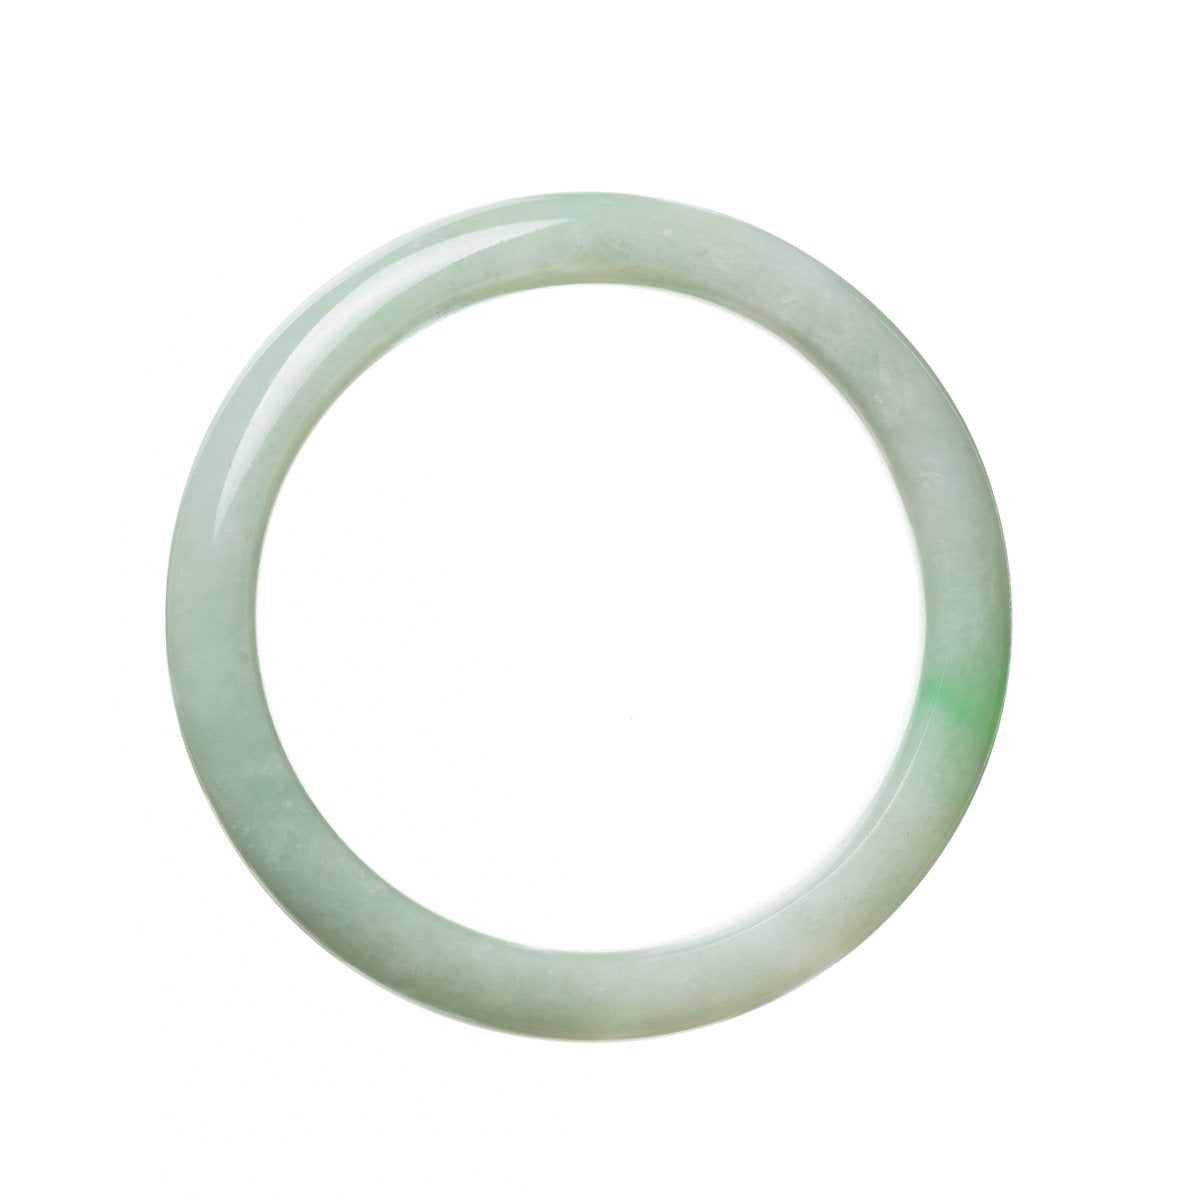 A light green Burma jade bangle with a round shape, measuring 64mm in diameter.